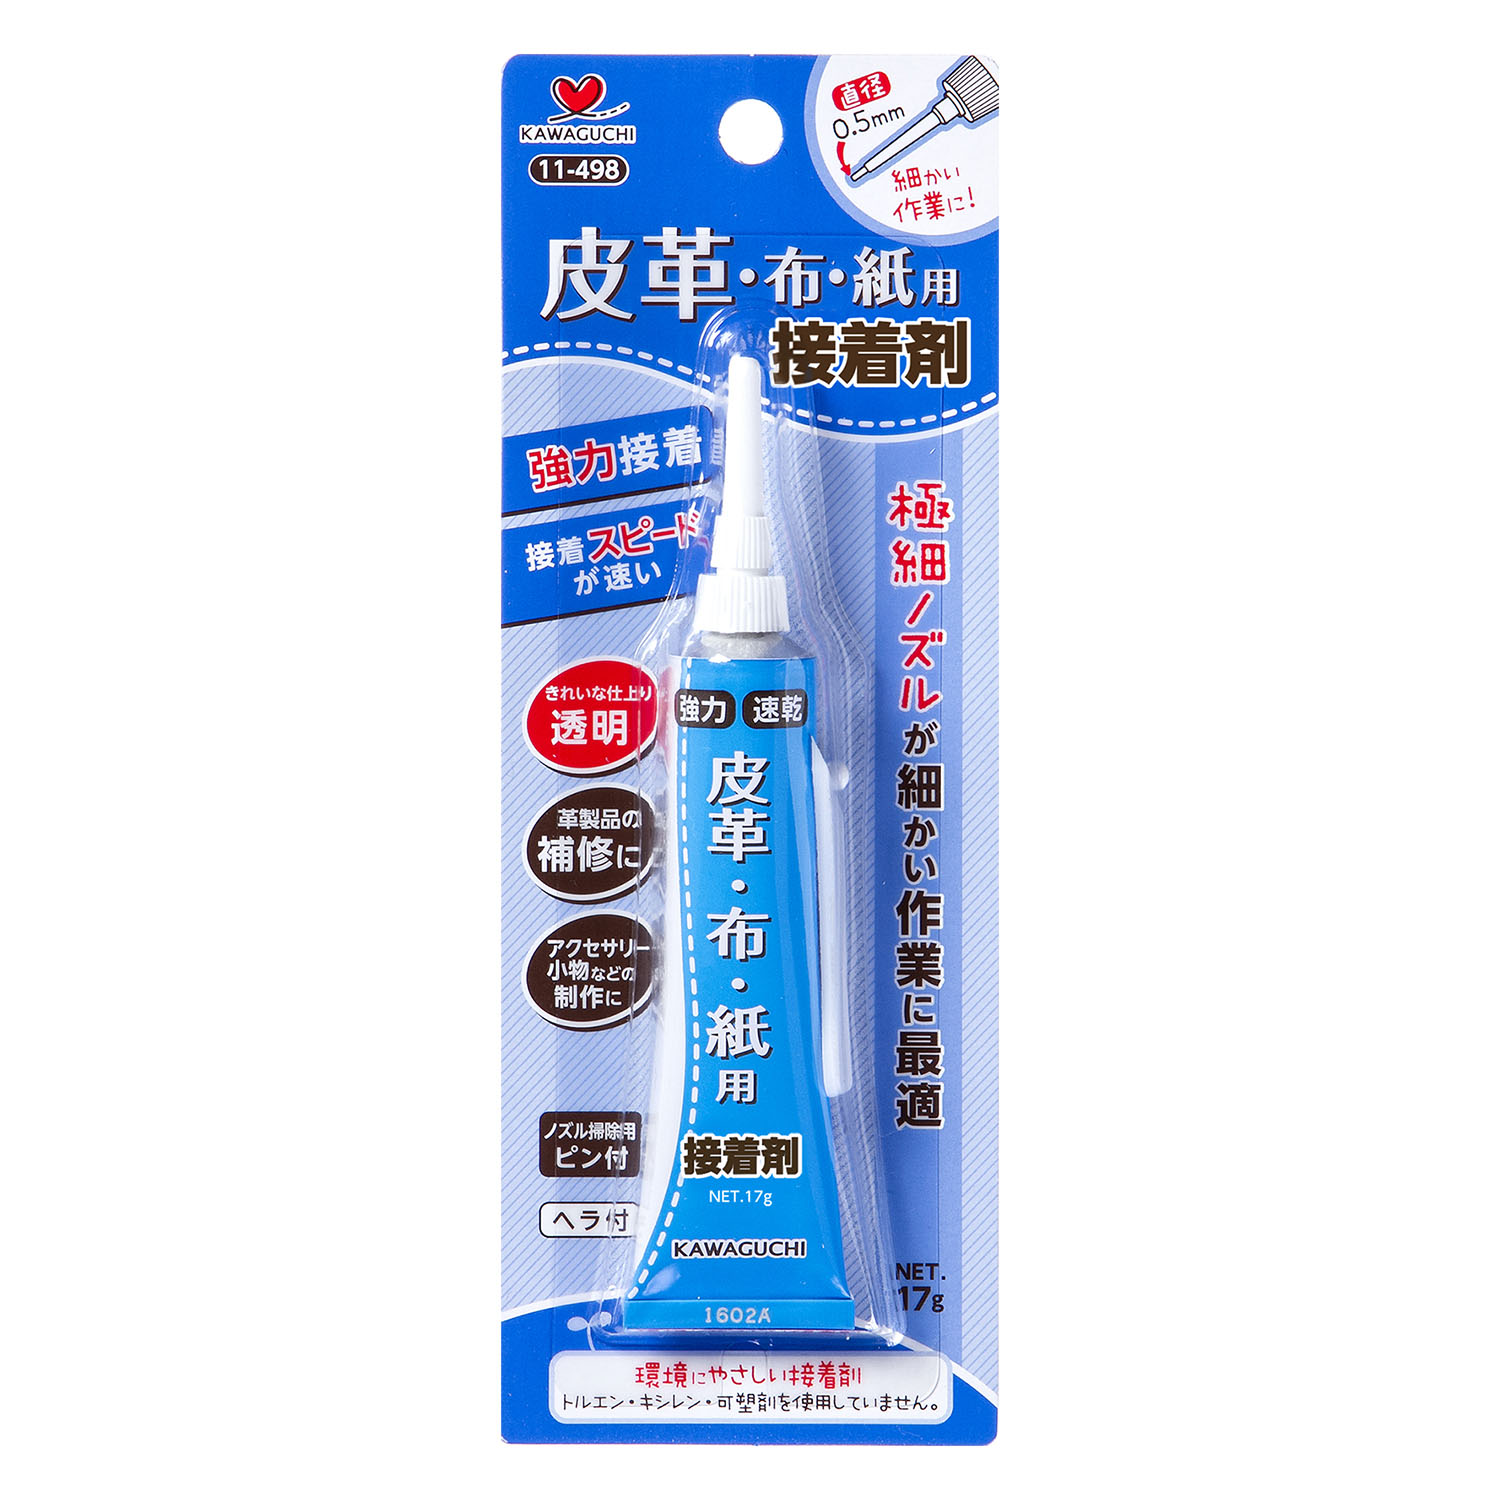 TK11498　Power Adhesive for Leather", Fabrics & Paper (pcs)